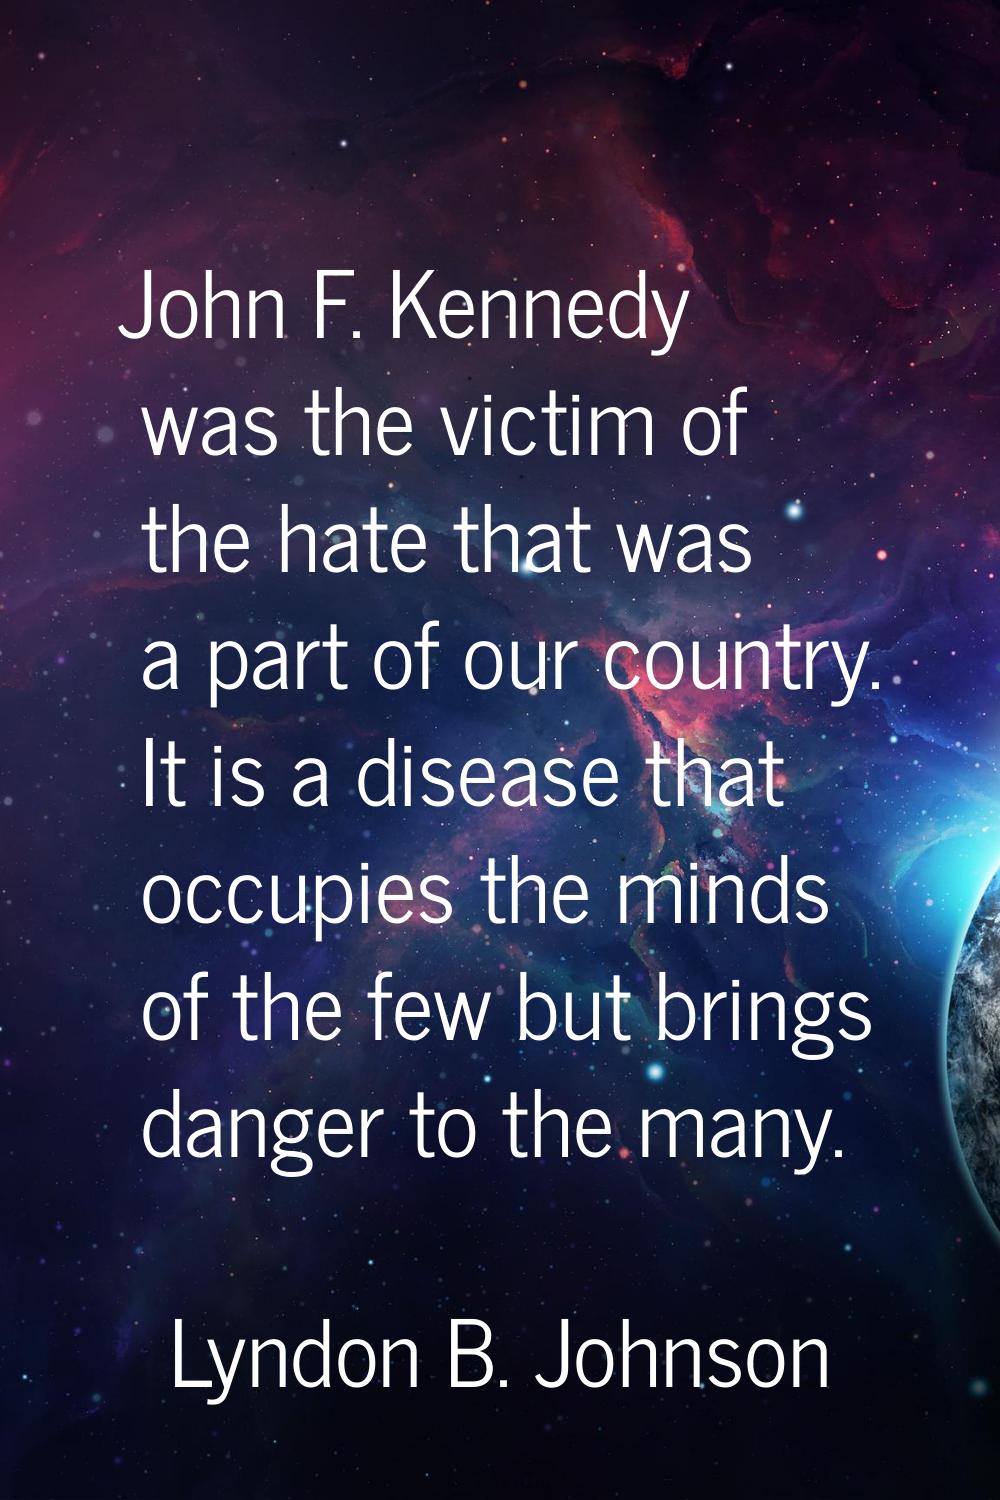 John F. Kennedy was the victim of the hate that was a part of our country. It is a disease that occ